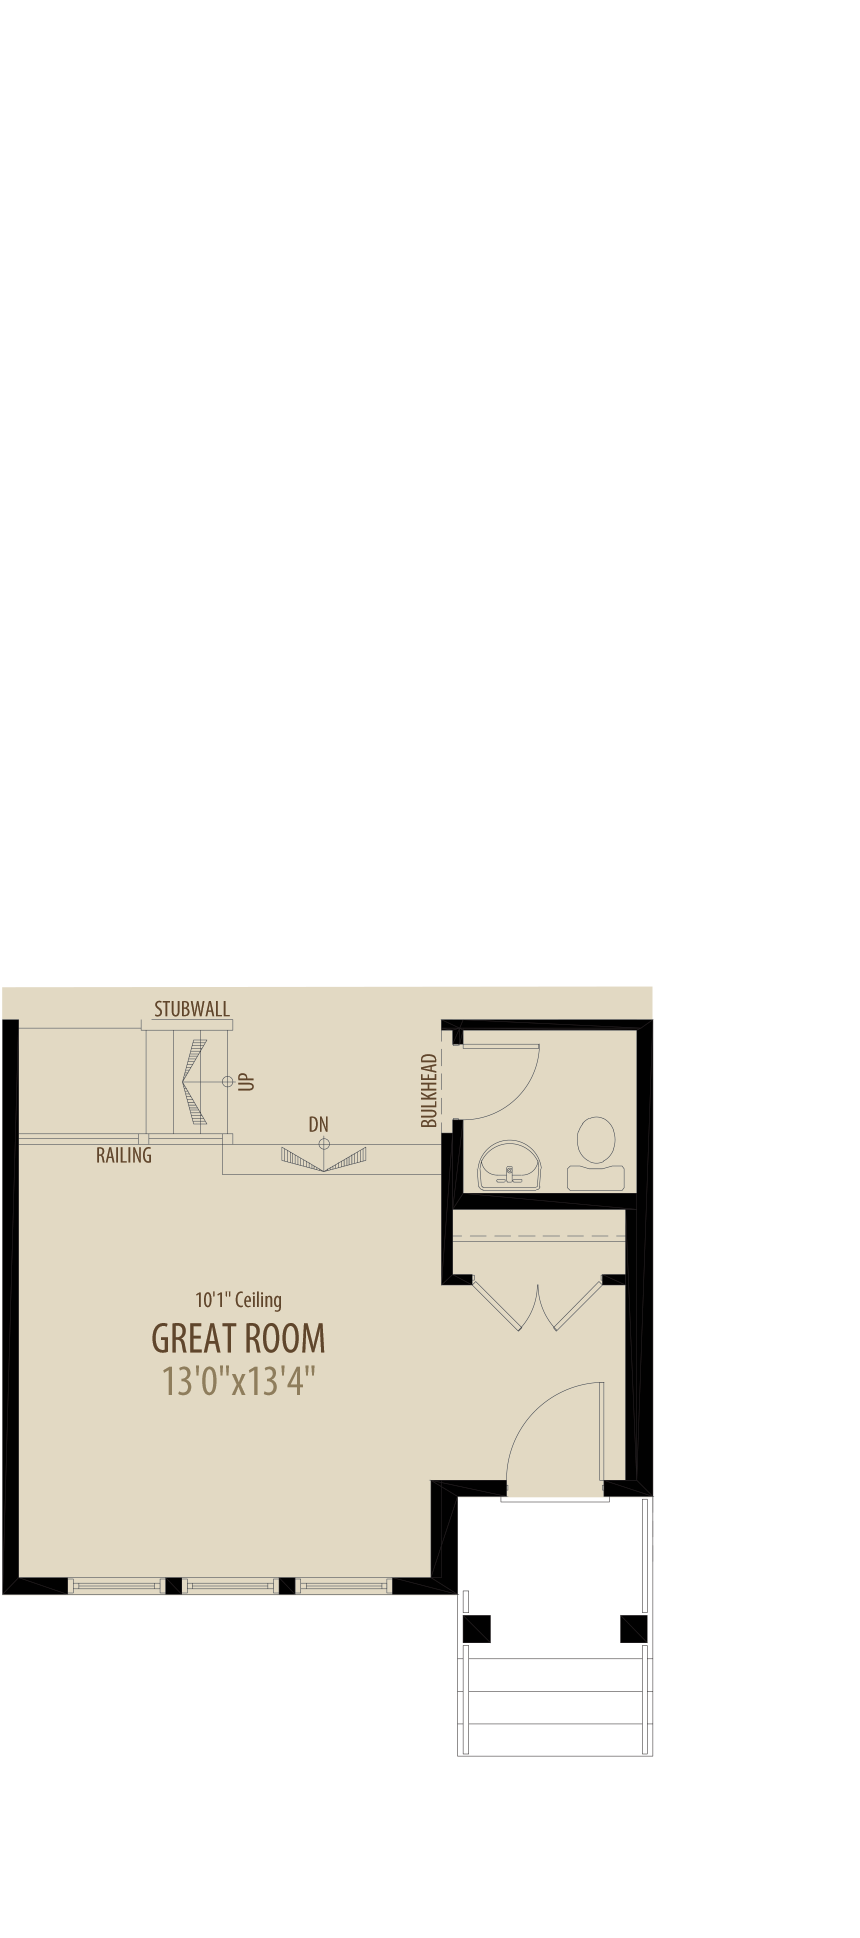 Grand Great Room